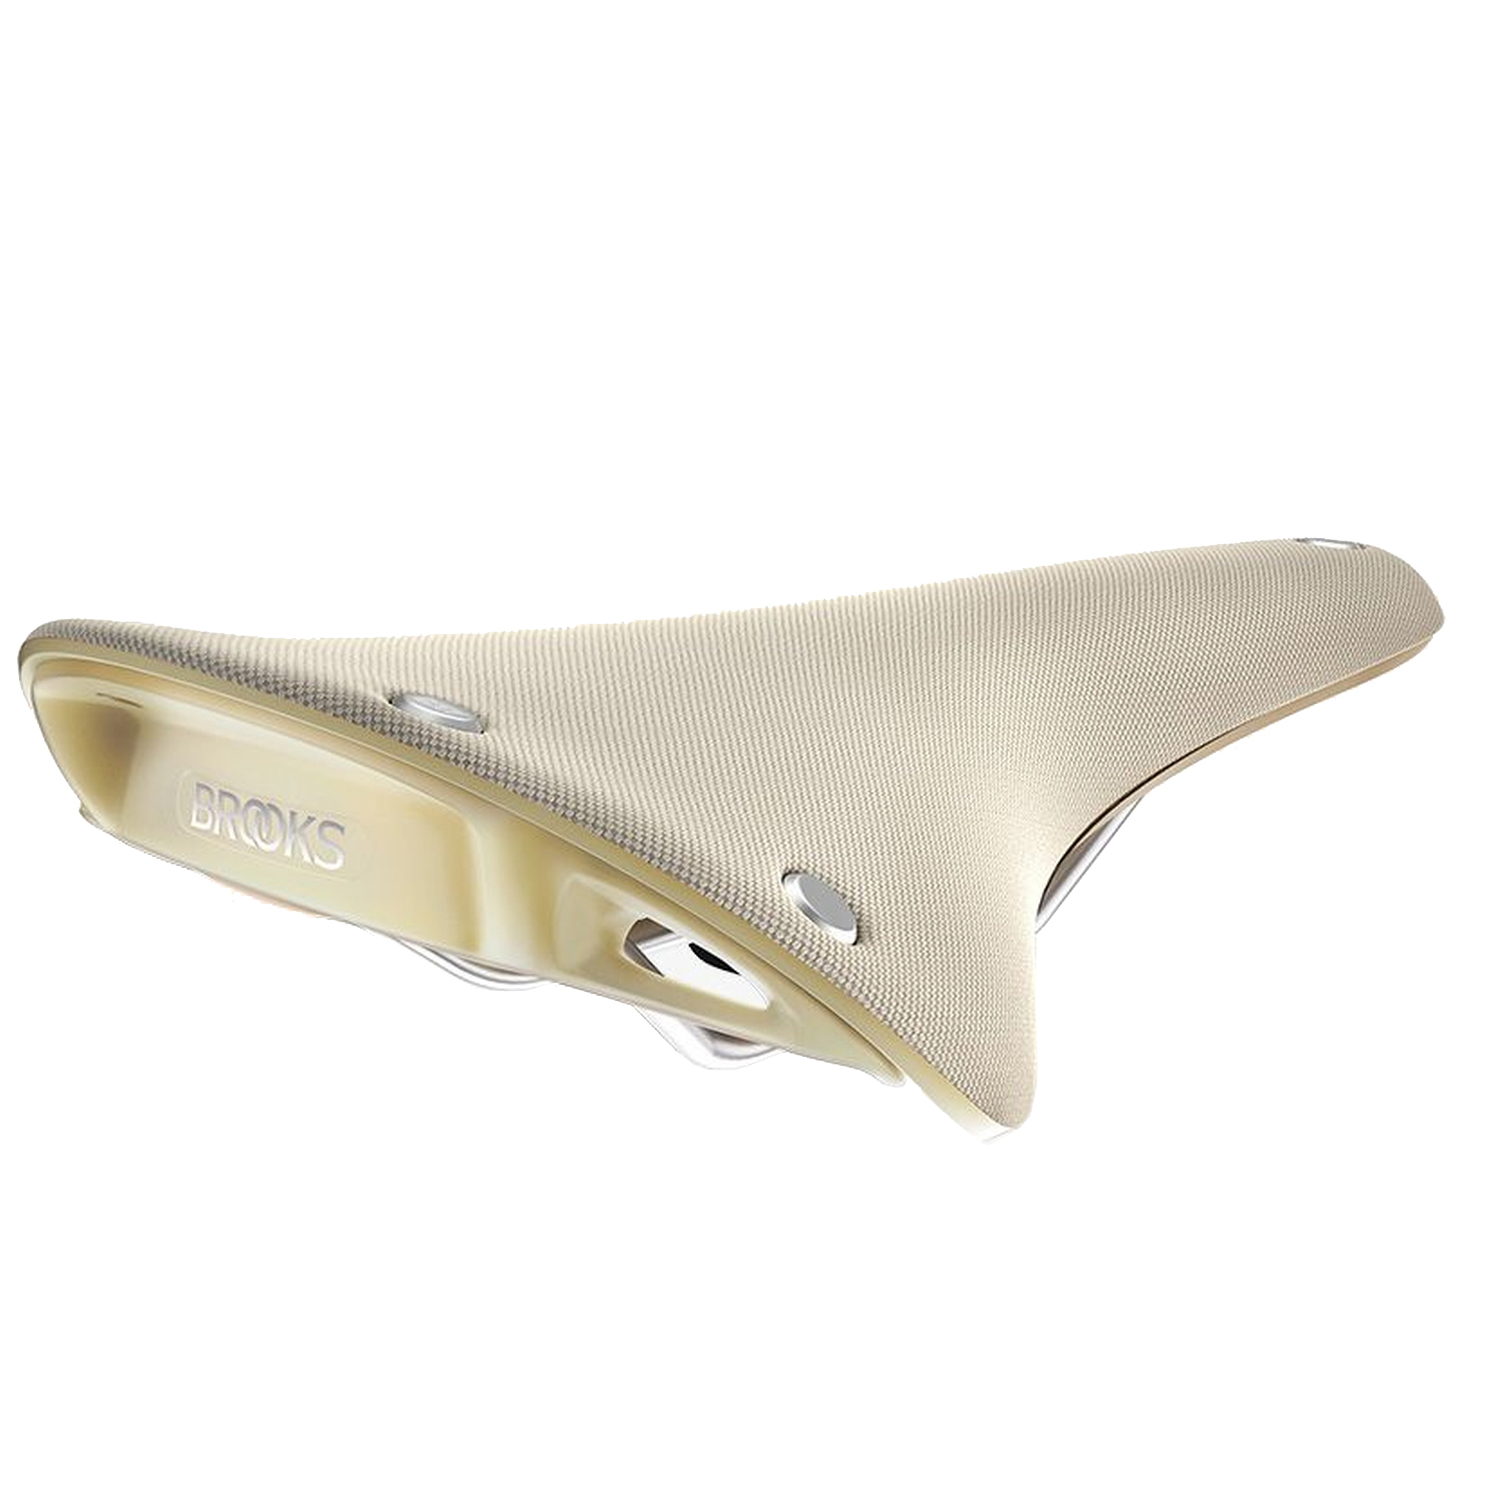 Image of Brooks Cambium C17 Special Recycled Nylon Saddle - natural